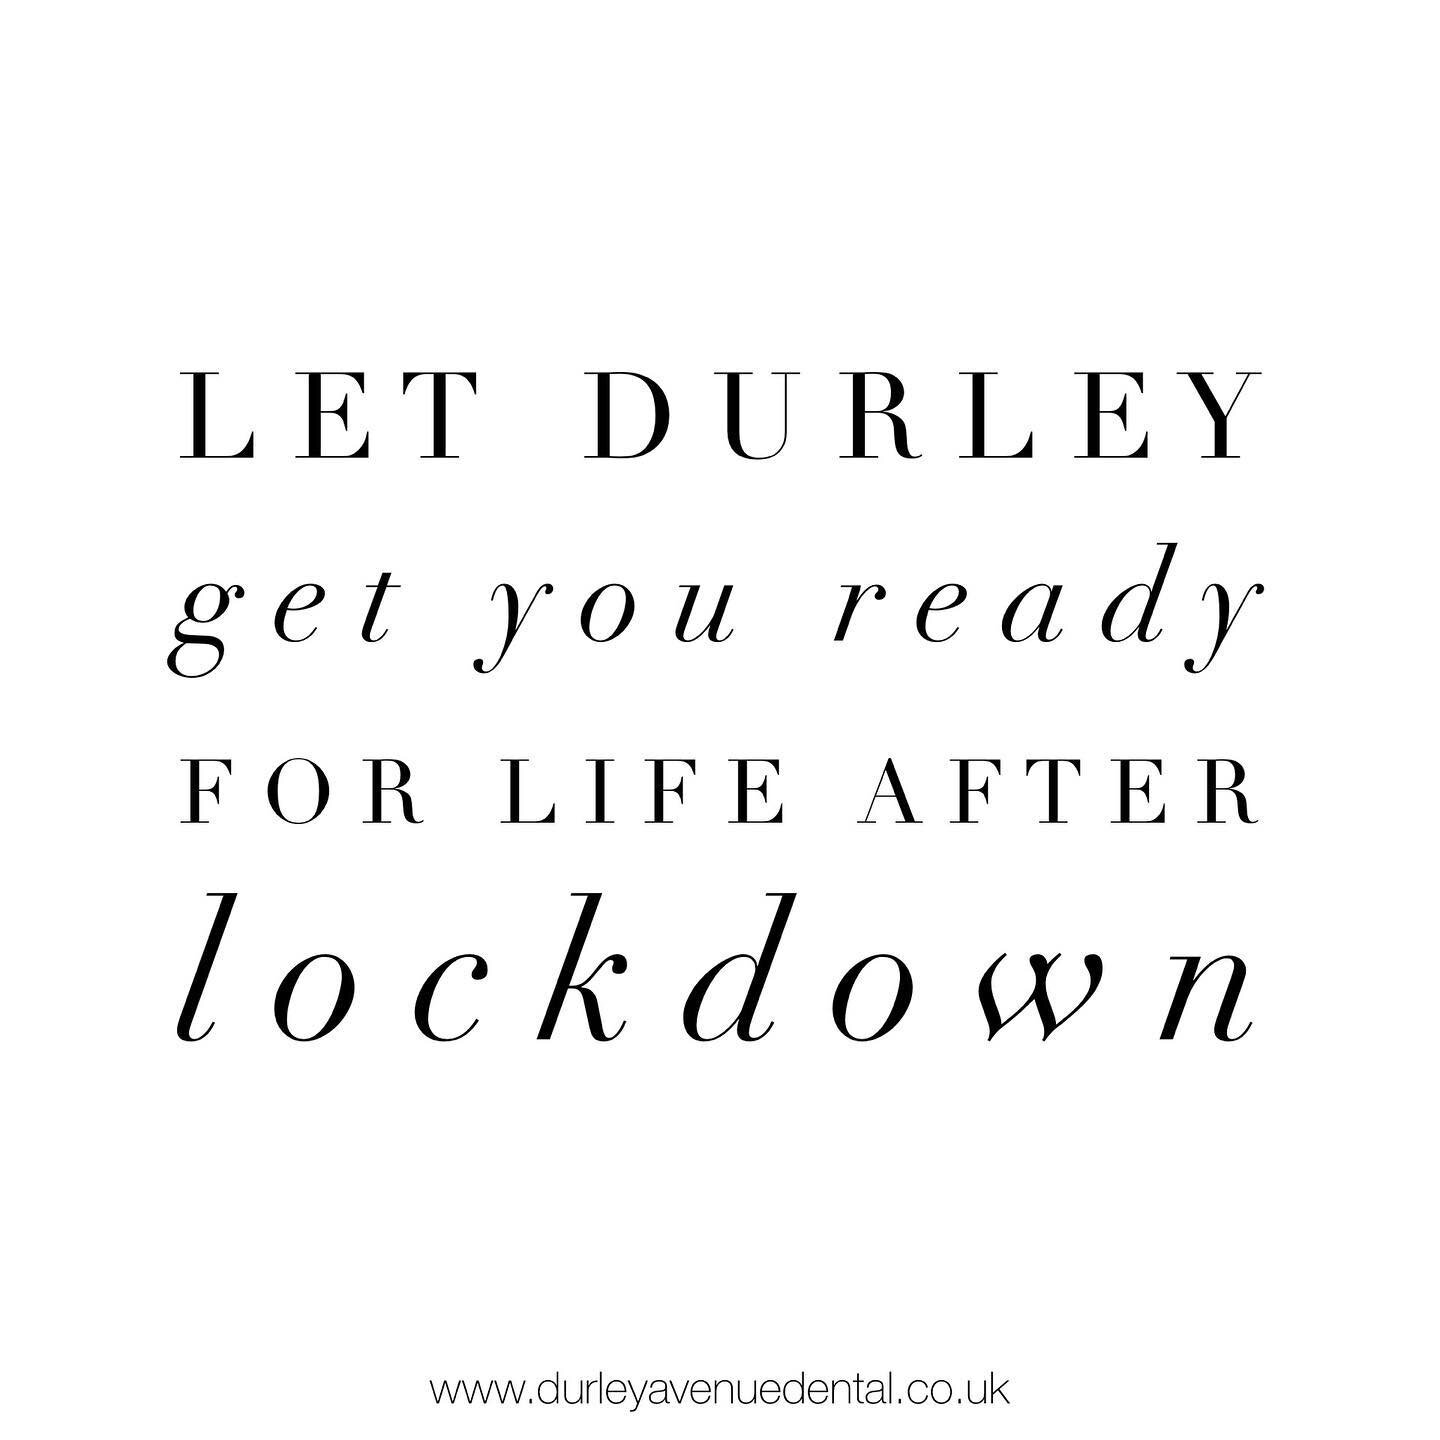 With the end of lockdown restrictions in sight (June 21st🤞🏼) we are now finally able to think about making plans for the future 🎉 and if like many of us you are determined to leave lockdown looking and feeling your best, then we can help you achie